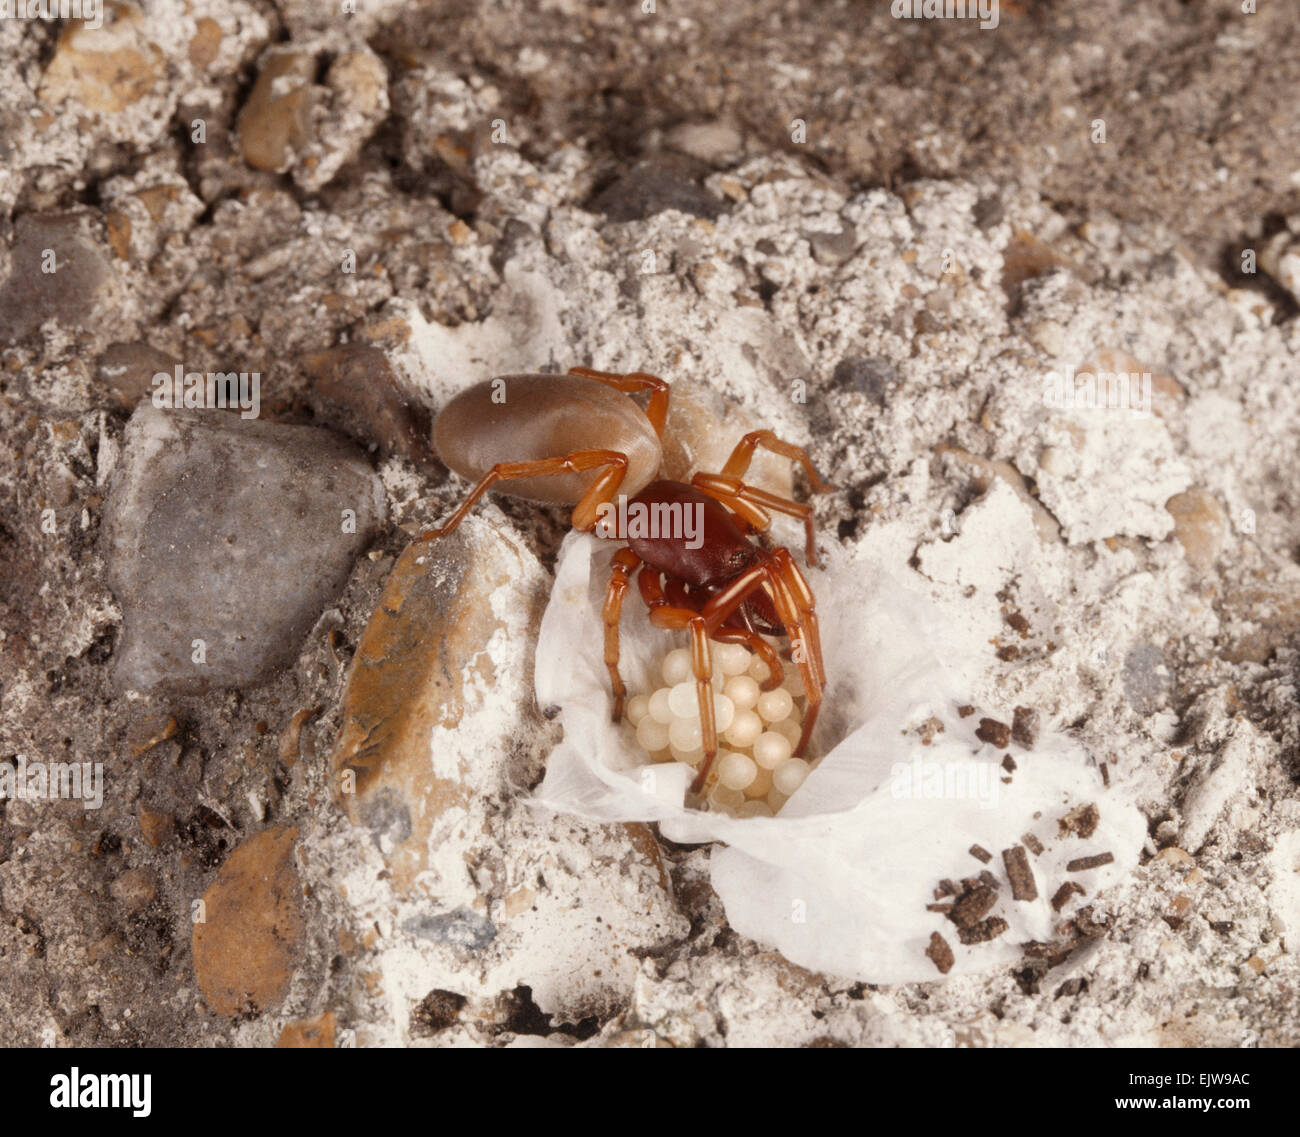 Dysdera crocata is a common and distinctive spider found in gardens, around buildings and on disturbed ground. Stock Photo